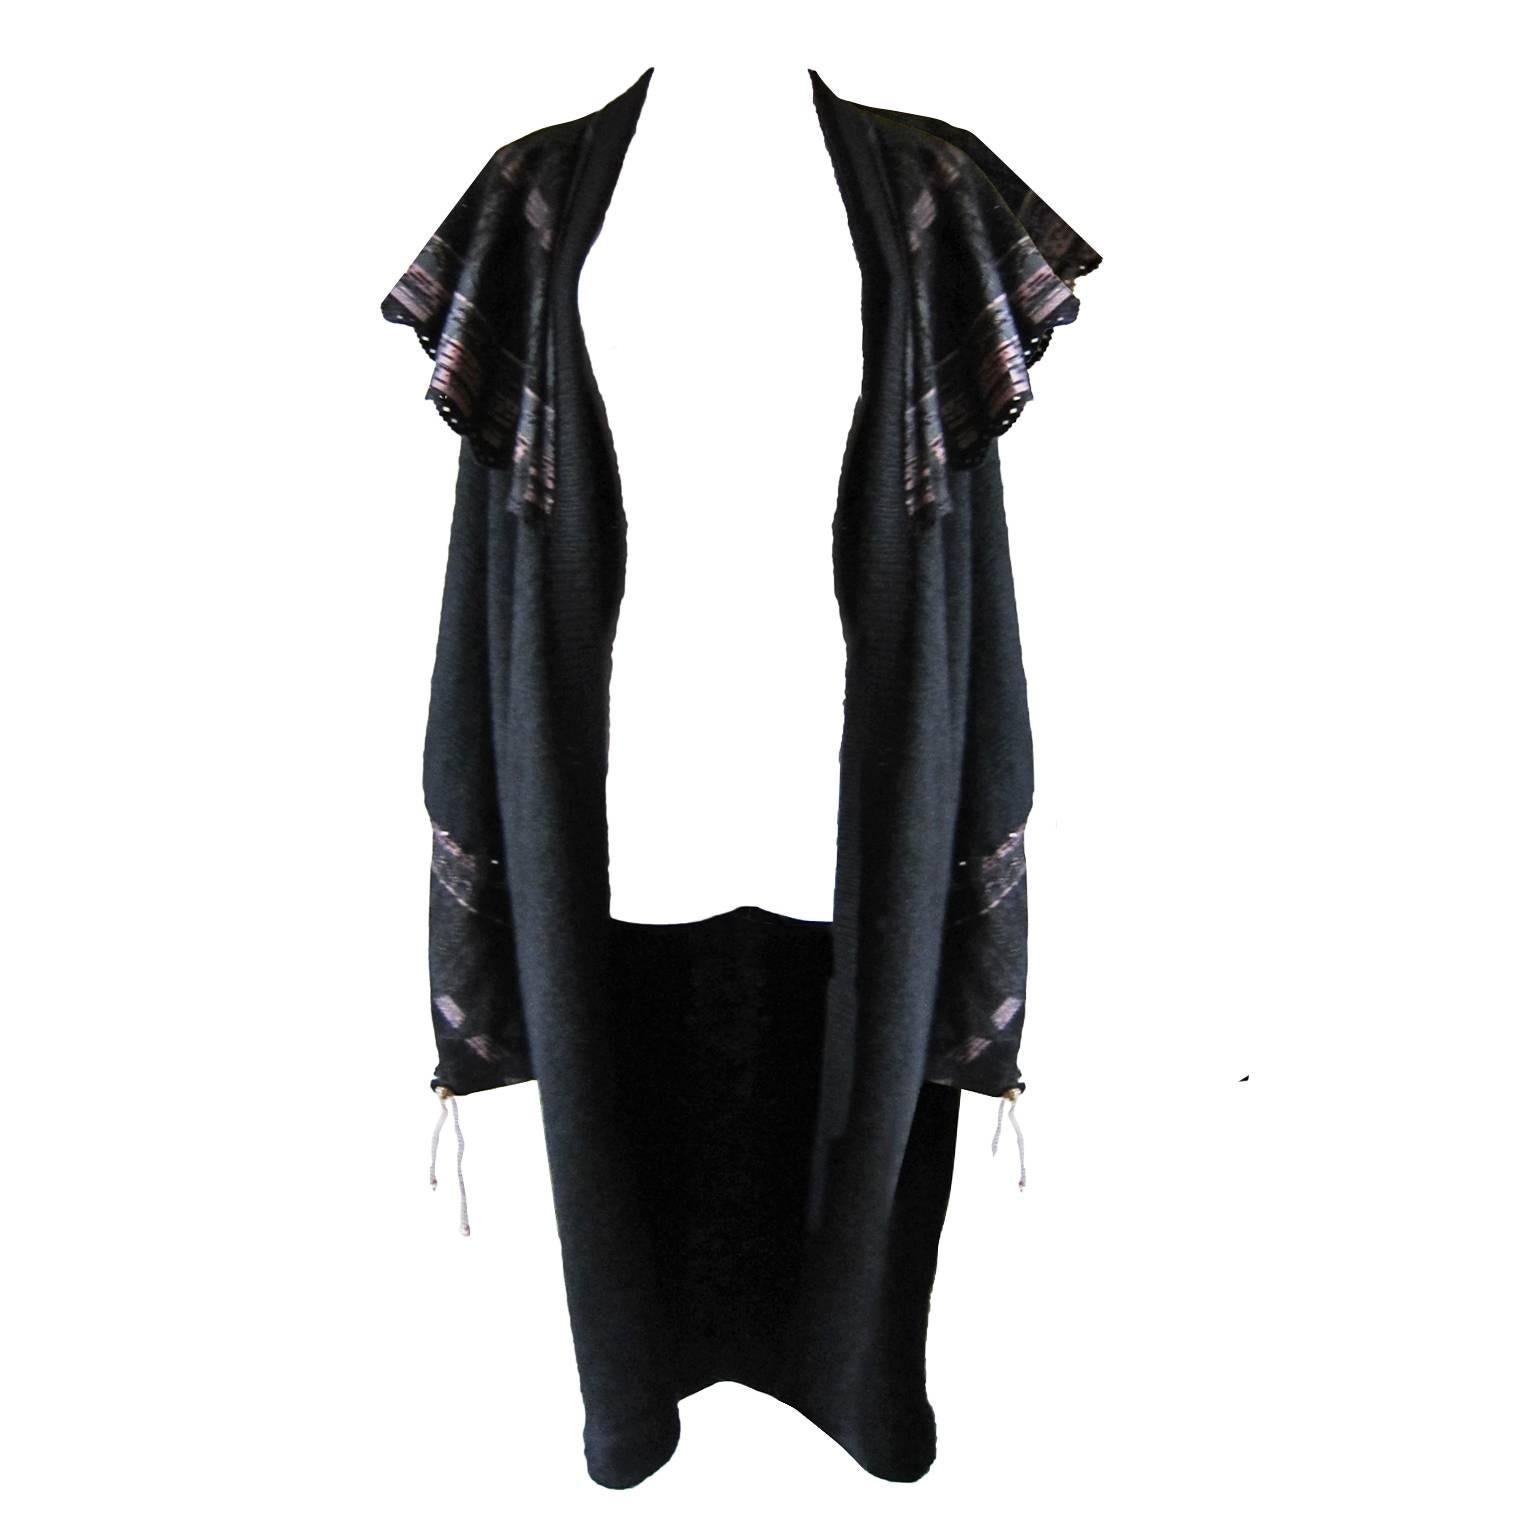 Zandra Rhodes mohair cardigan kimono style coat from circa 1970's.  Detailed faux leather detail  collar and sleeves. A bow closure.
Measurements : 
Neck to cuff : 79 cm
Center back length : 107 cm


